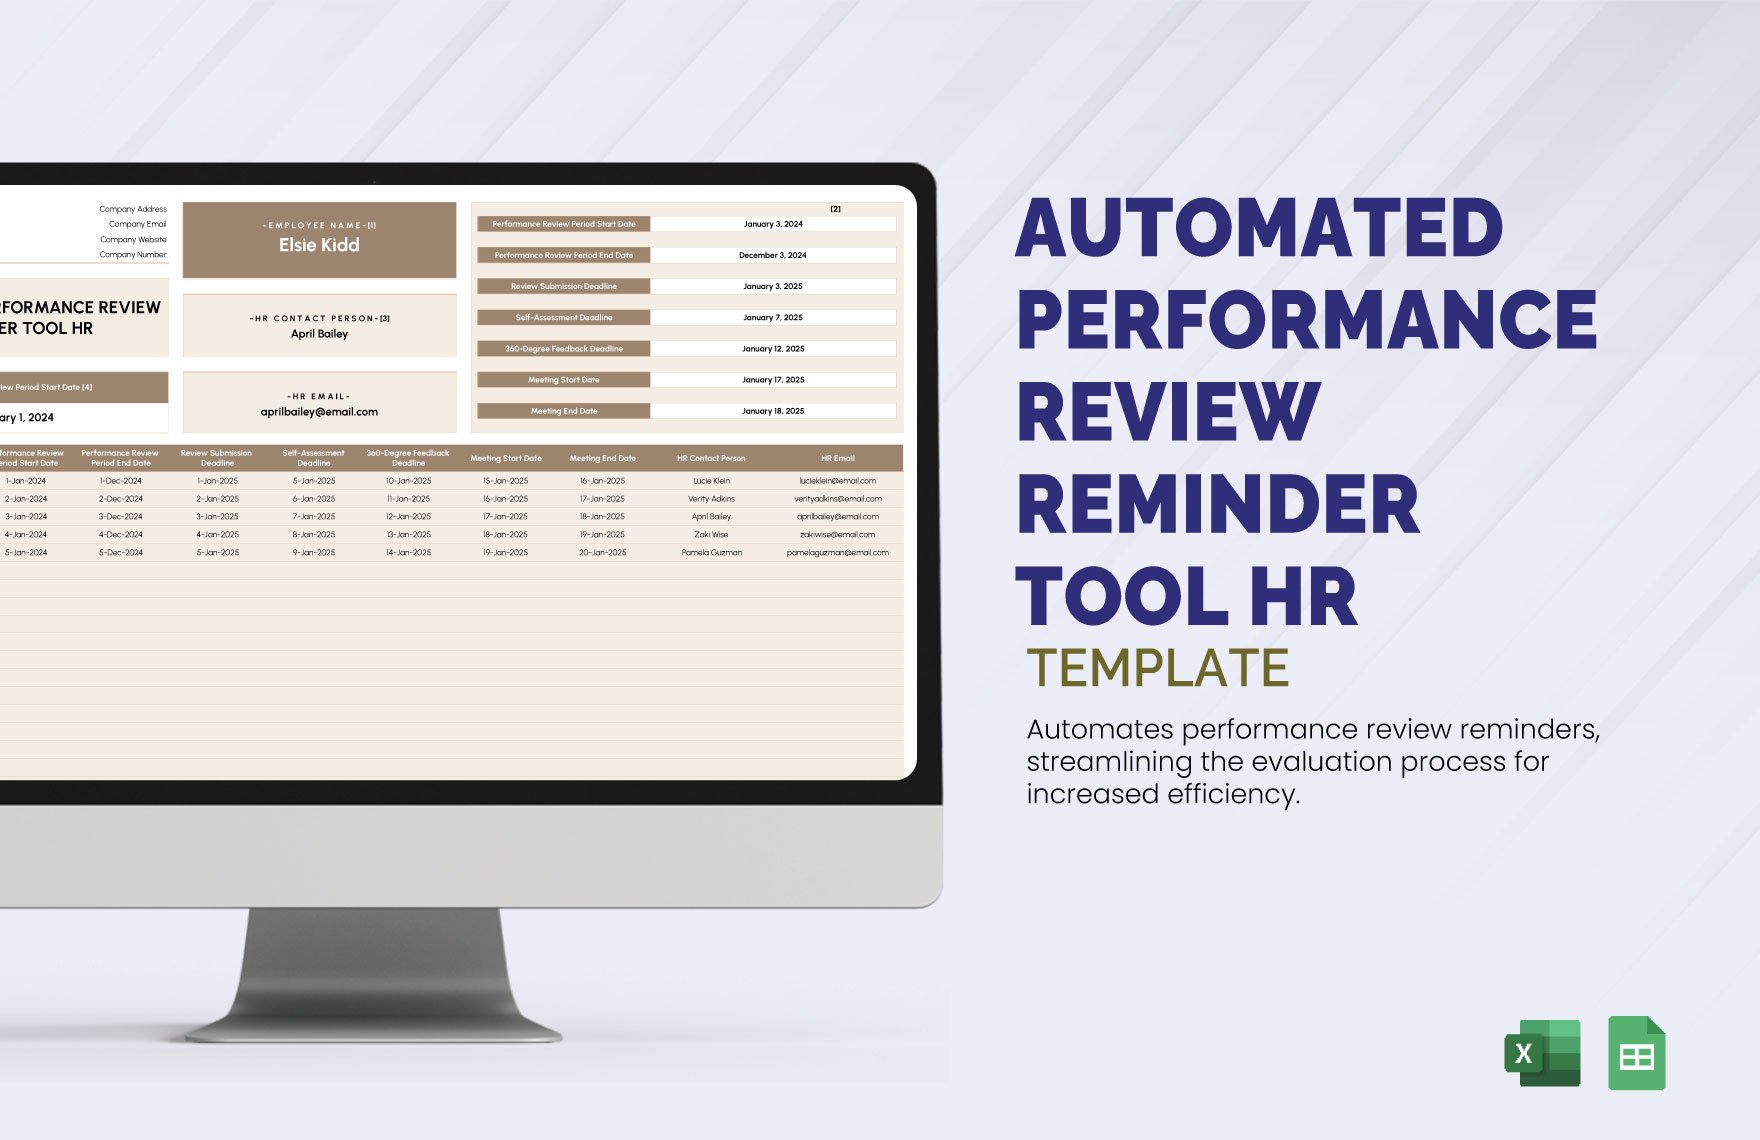 Automated Performance Review Reminder Tool HR Template